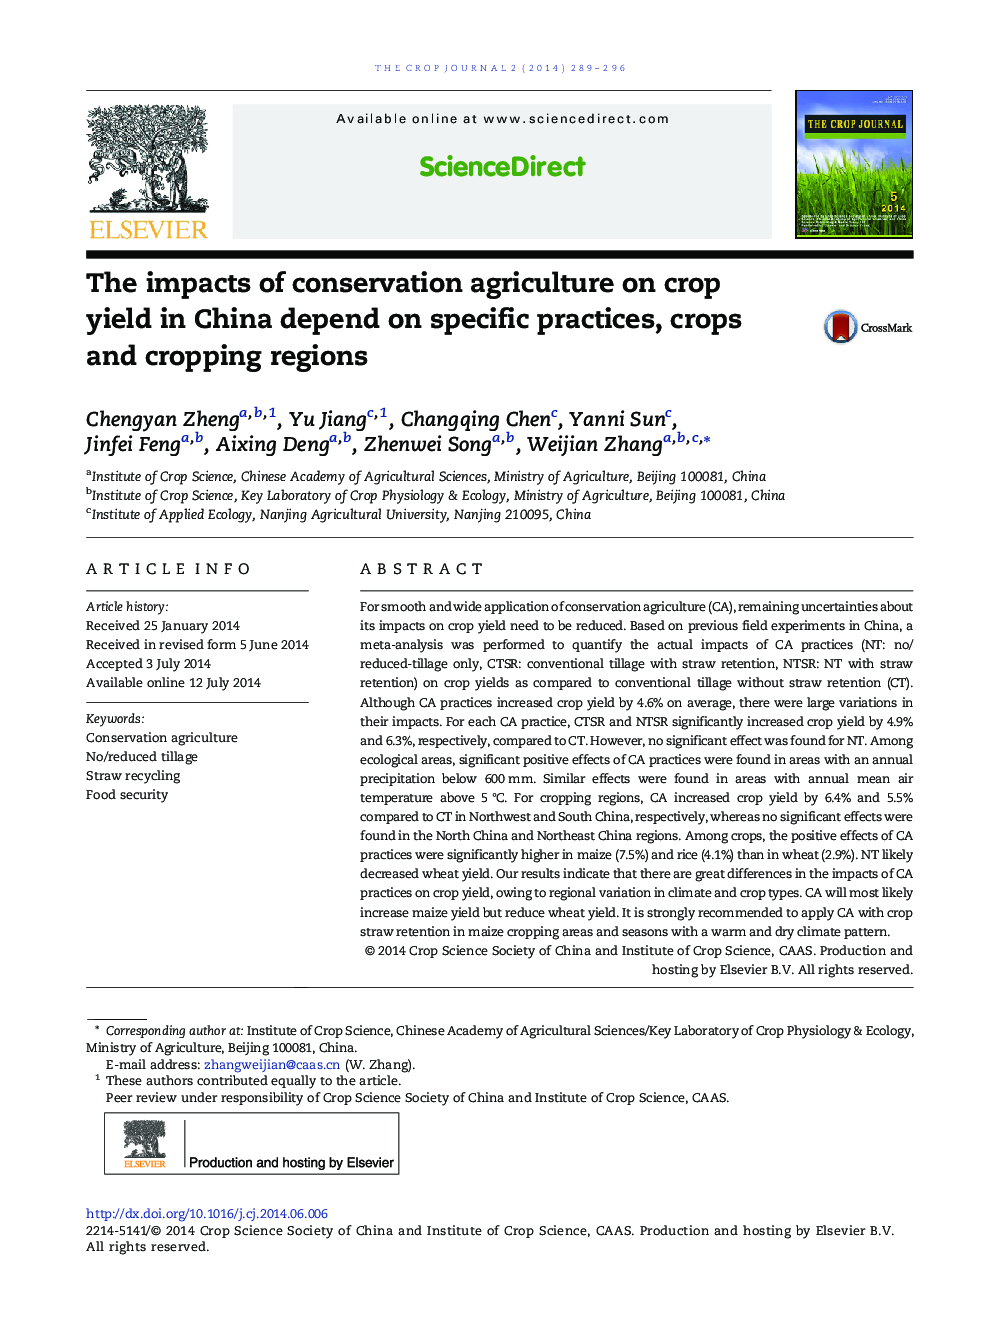 The impacts of conservation agriculture on crop yield in China depend on specific practices, crops and cropping regions 